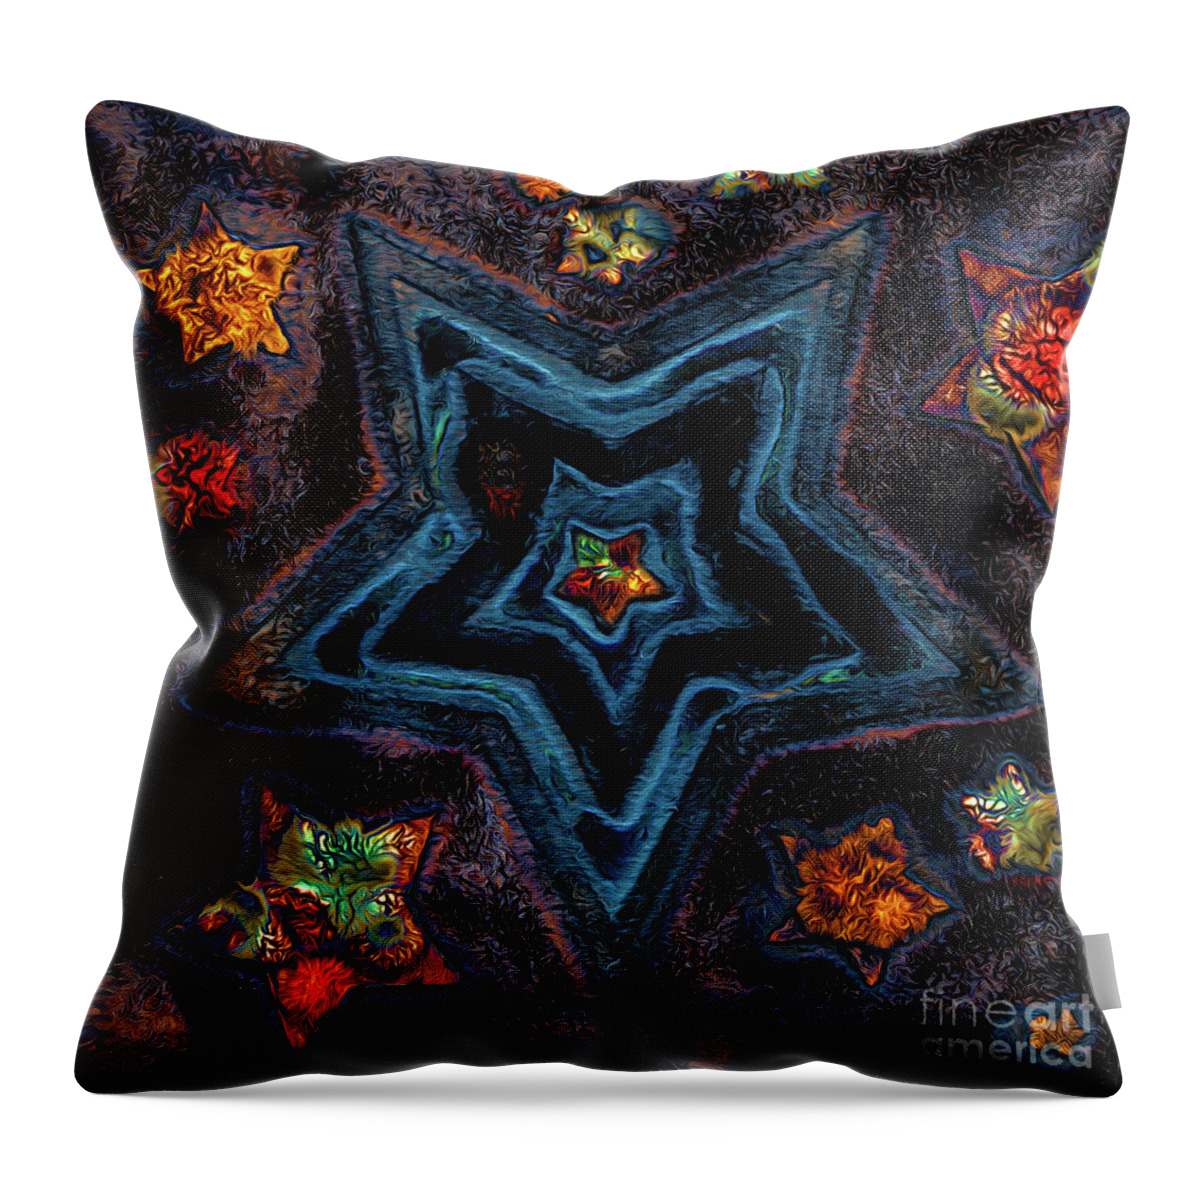 Abstract Throw Pillow featuring the ceramic art Bluestar Ceramic Tile Reproduction by Roslyn Wilkins